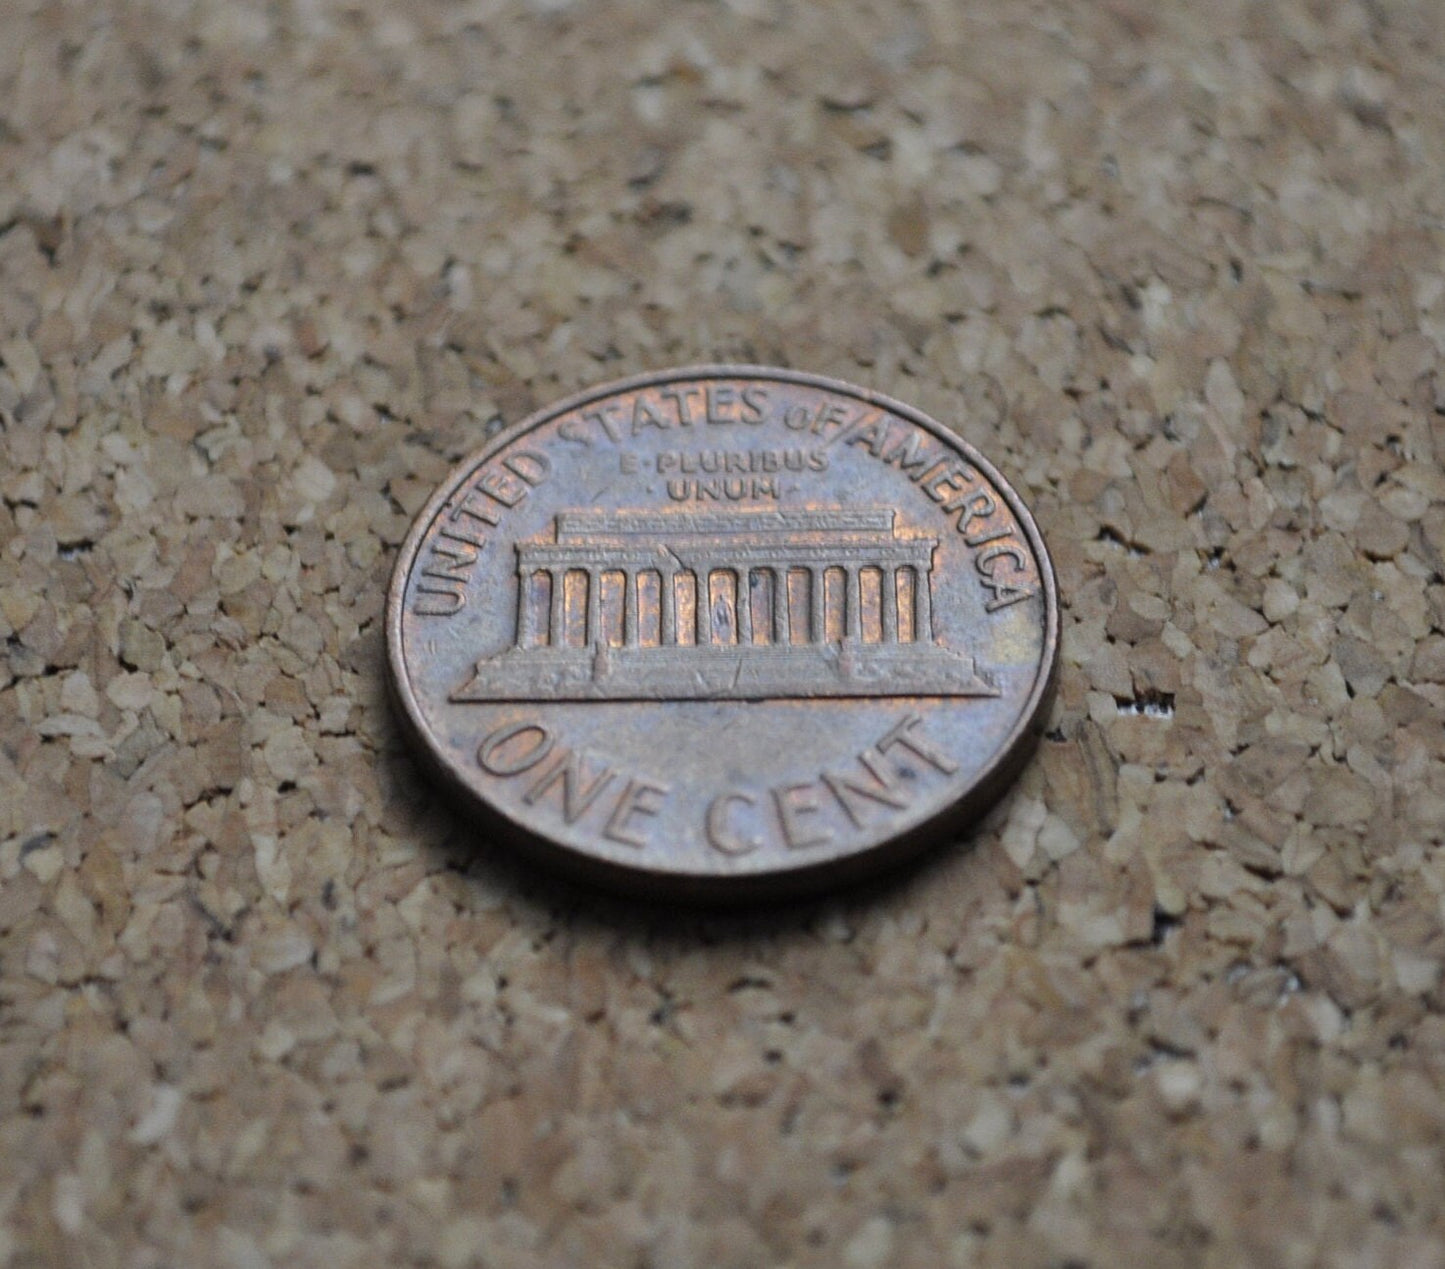 1968 Memorial Penny - Excellent Condition - 53rd Anniversary - Collectible Coin